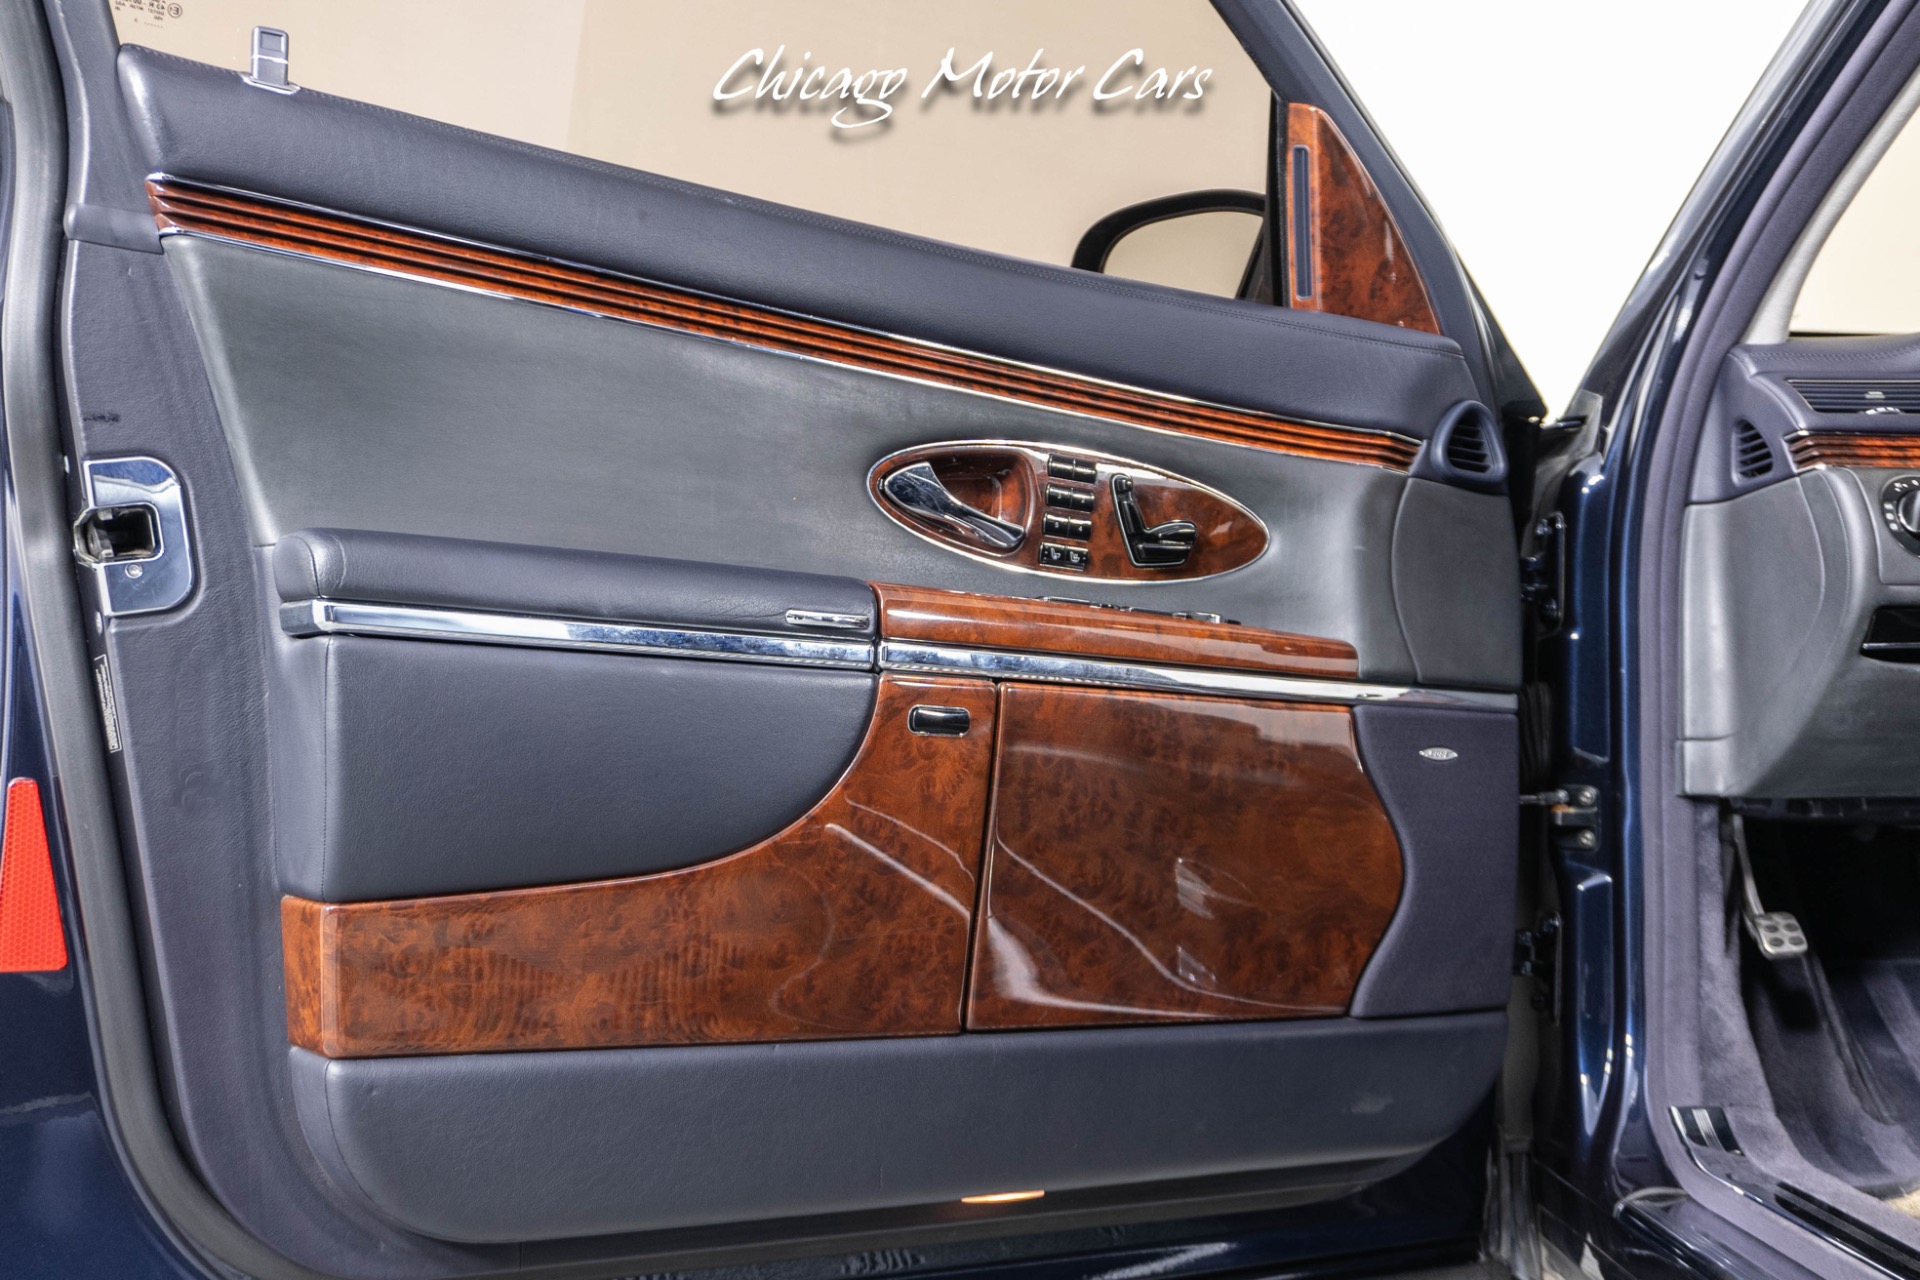 Used-2004-Maybach-62-LWB-Electrotransparent-Glass-Roof-Ventilated-Front-and-Rear-Seats-Loaded